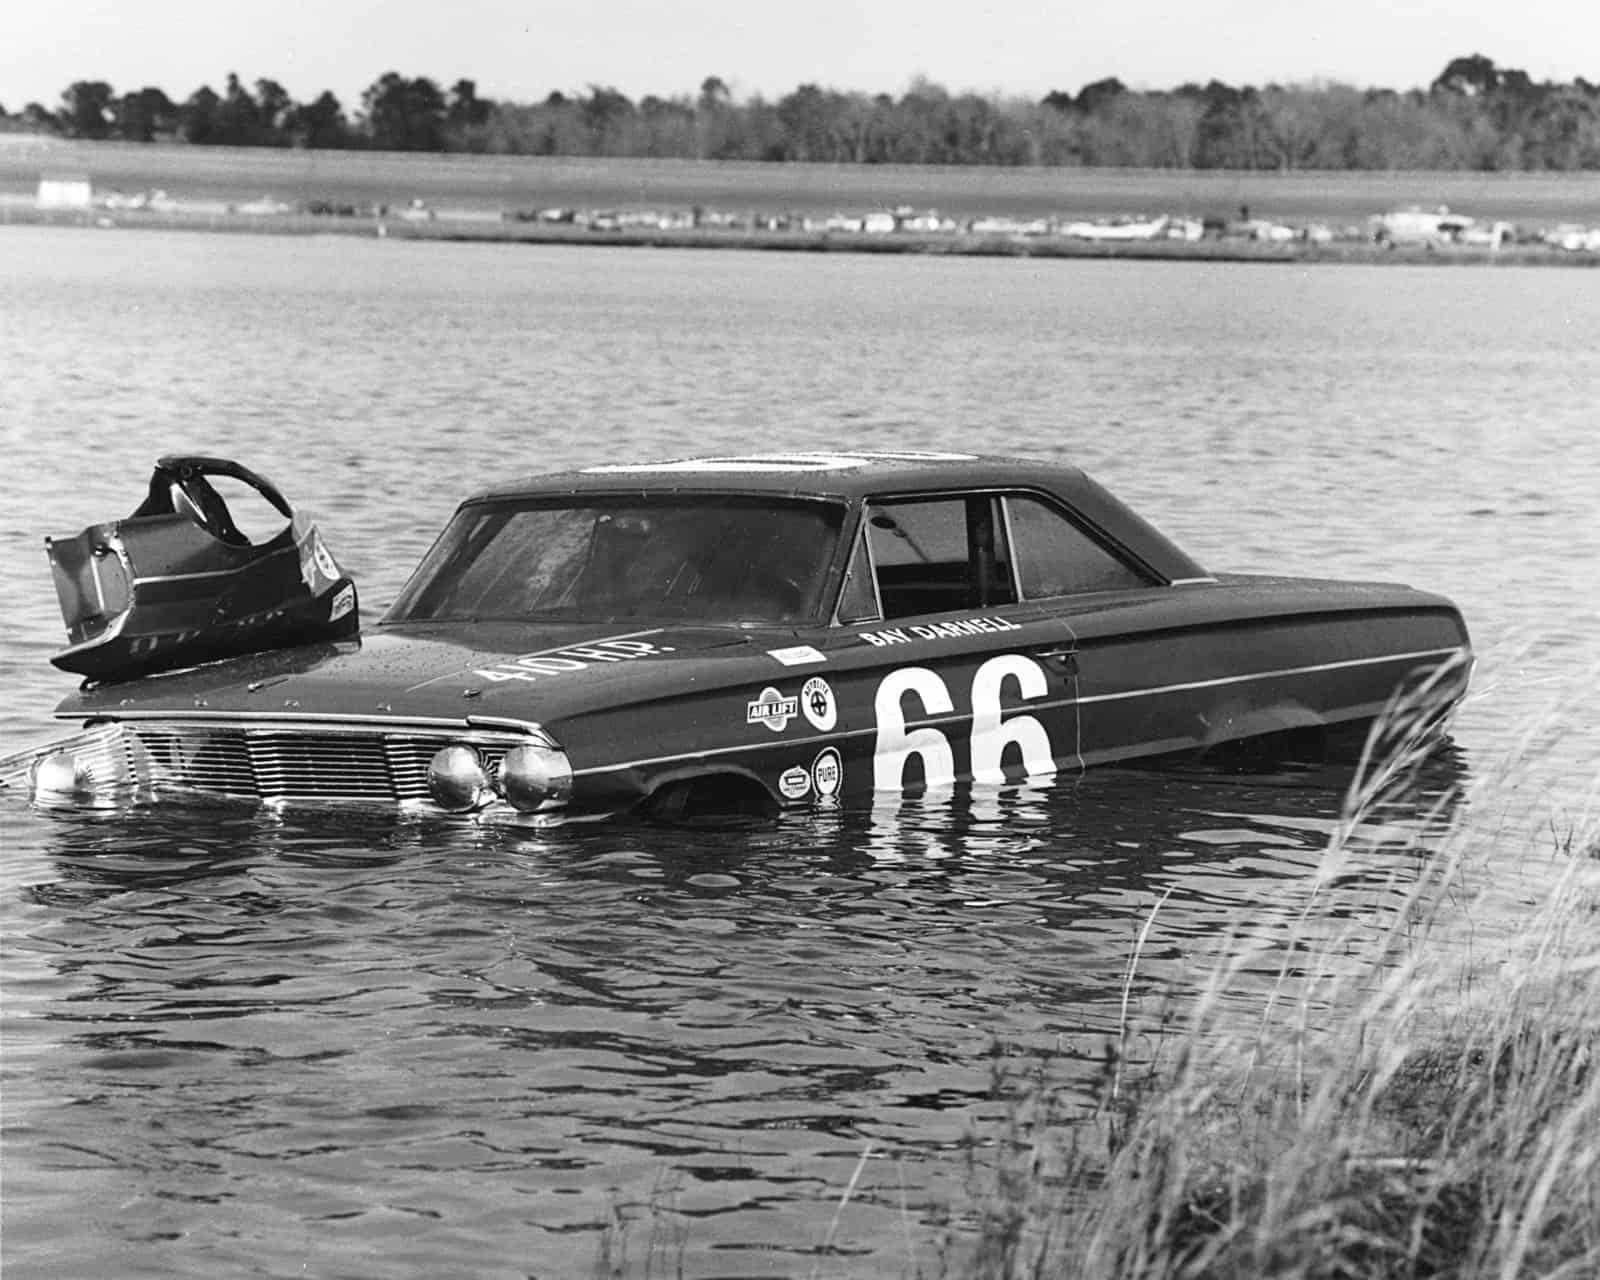 Bay darnell crashes into lake lloyd in 1964. Photo by isc images & archives